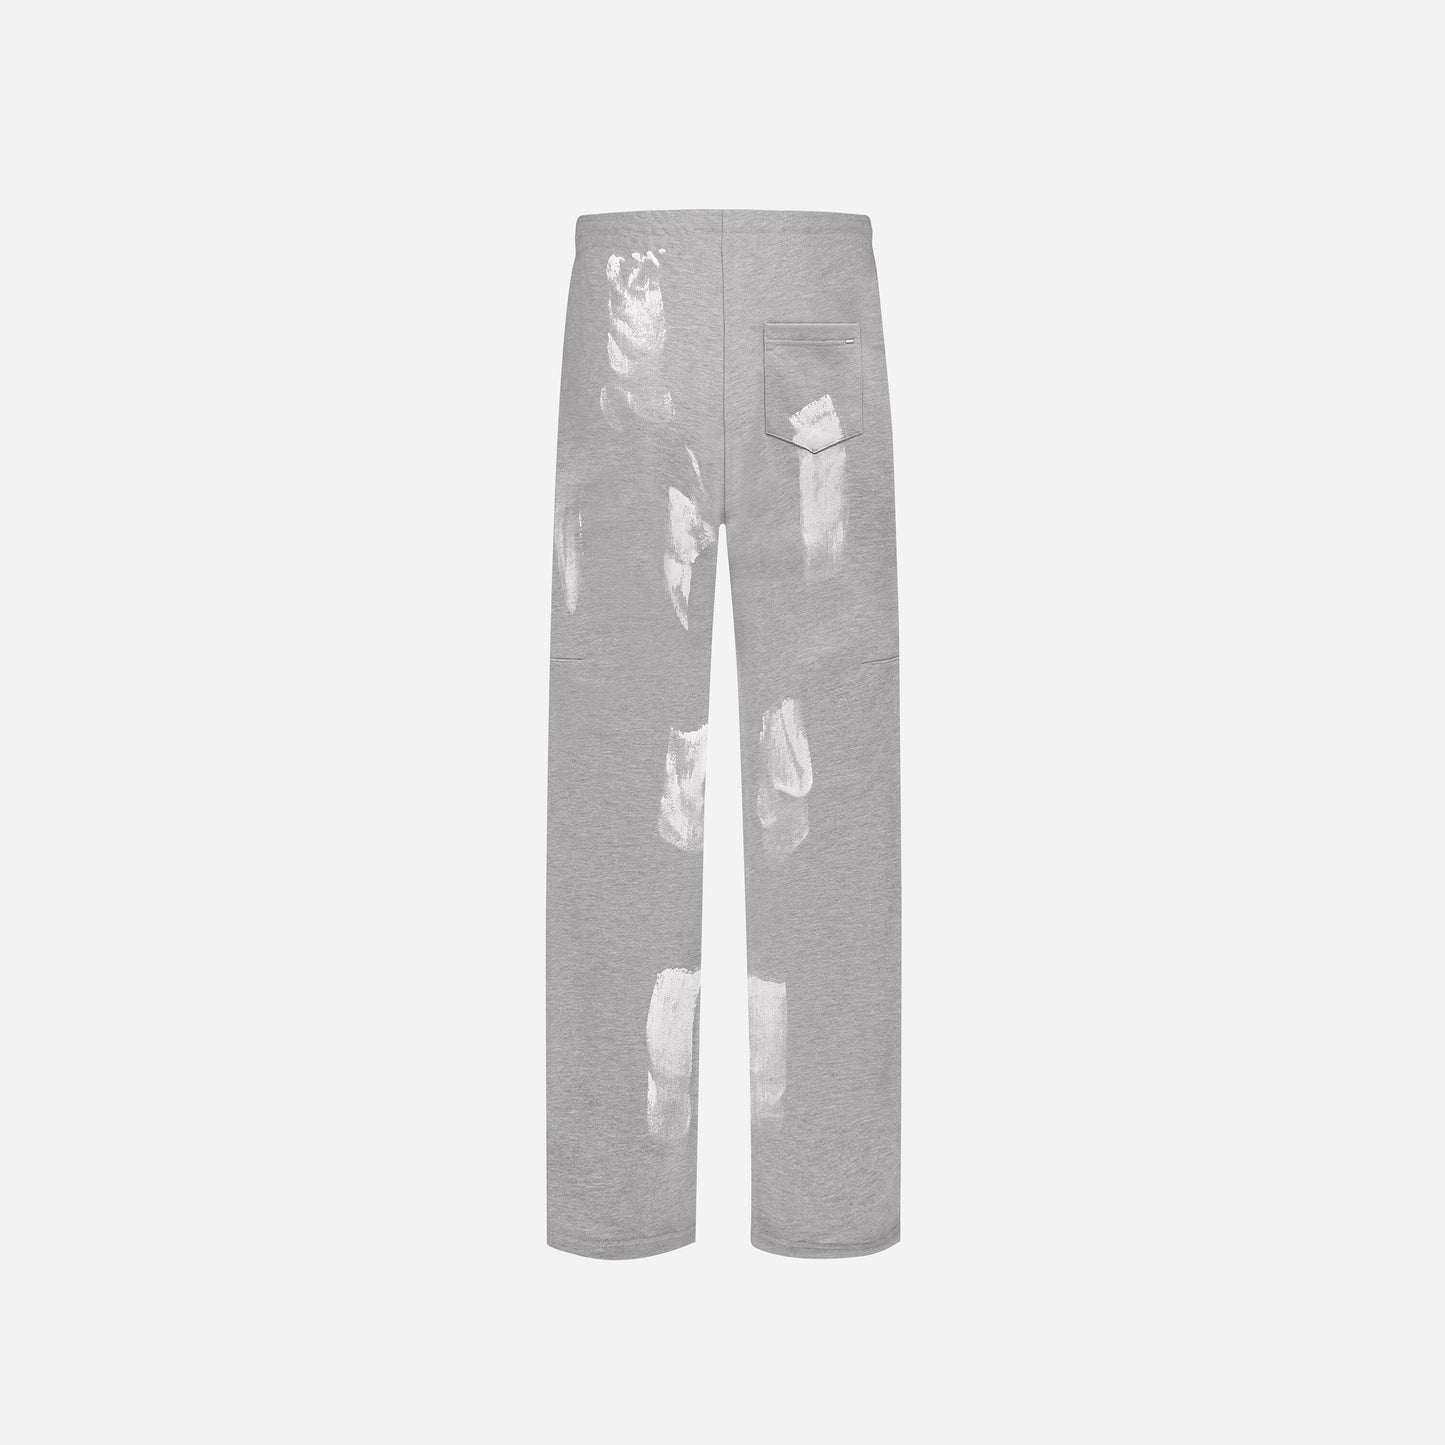 'Atelier' Sweatpants with Paint Stains in Grey